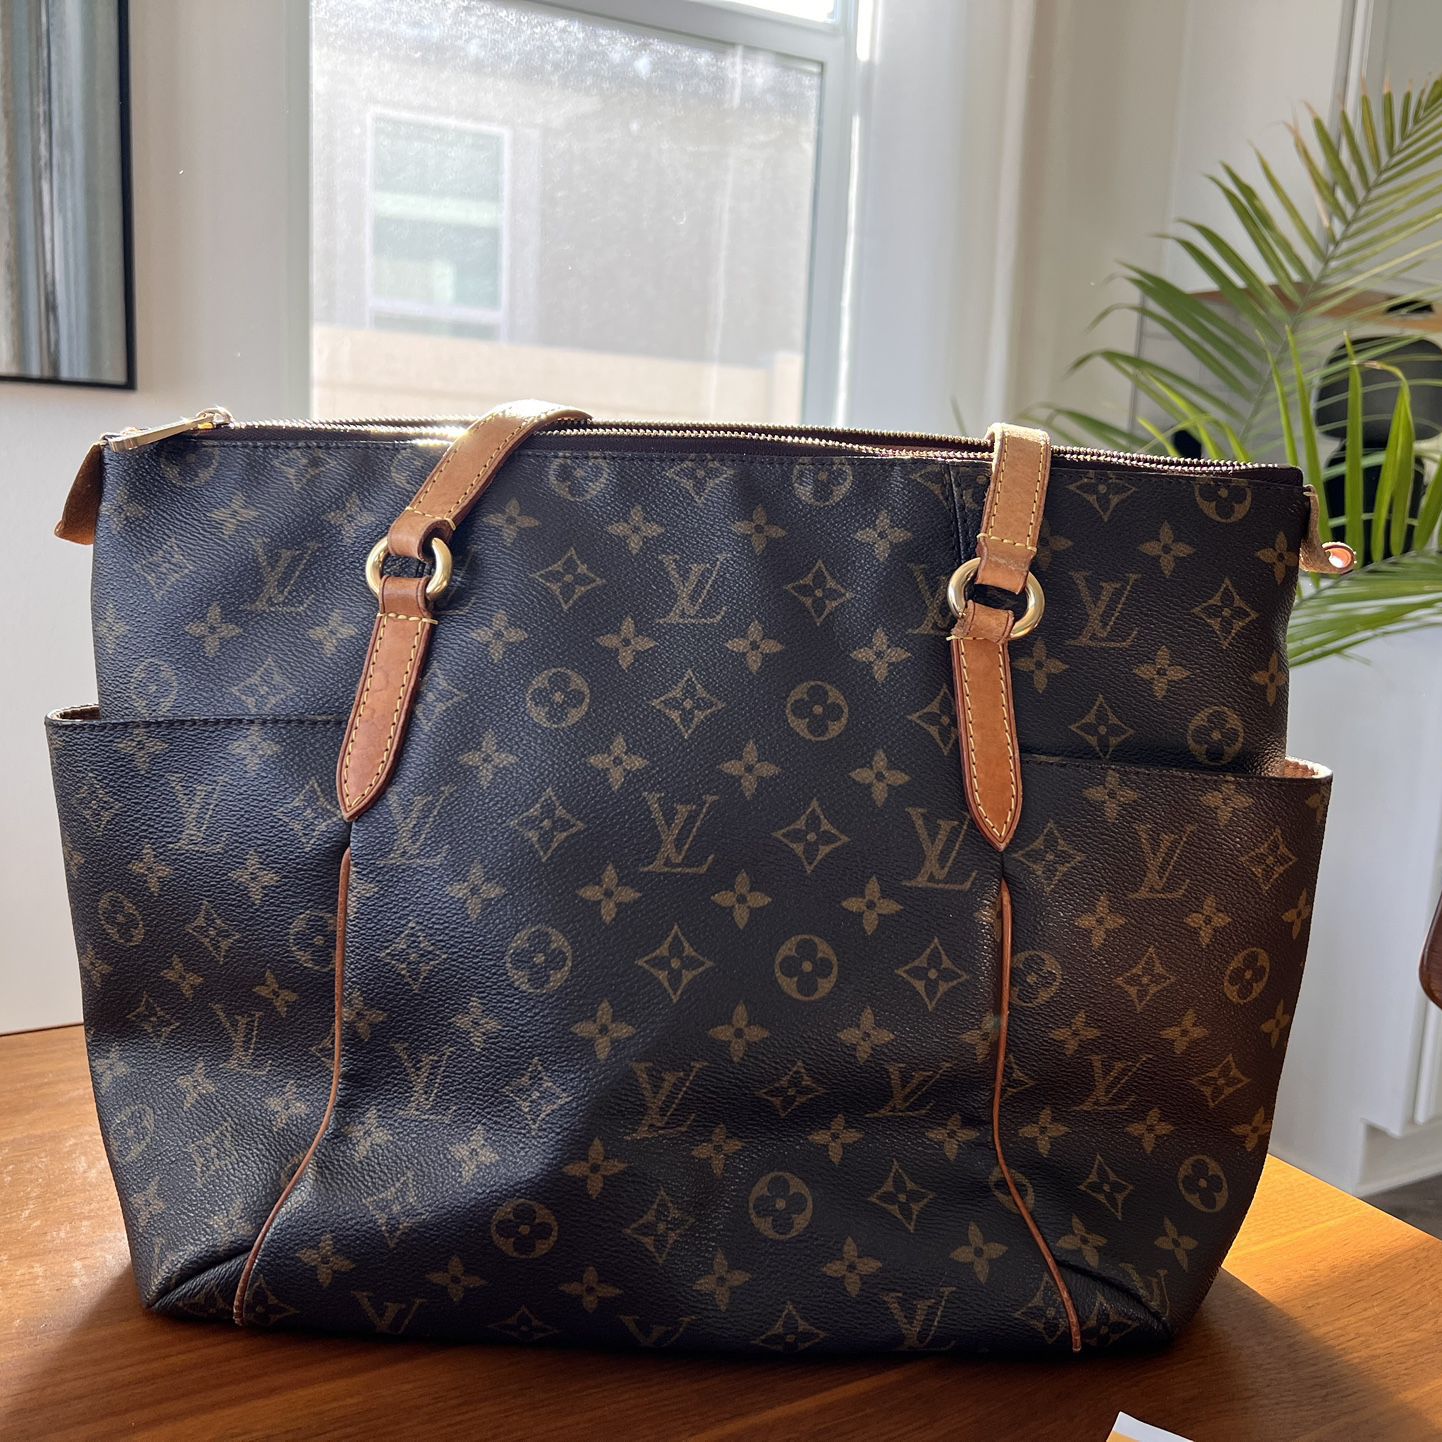 New Authentic Sully MM Monogram louis vuitton bag for Sale in Bloomingdale,  IL - OfferUp